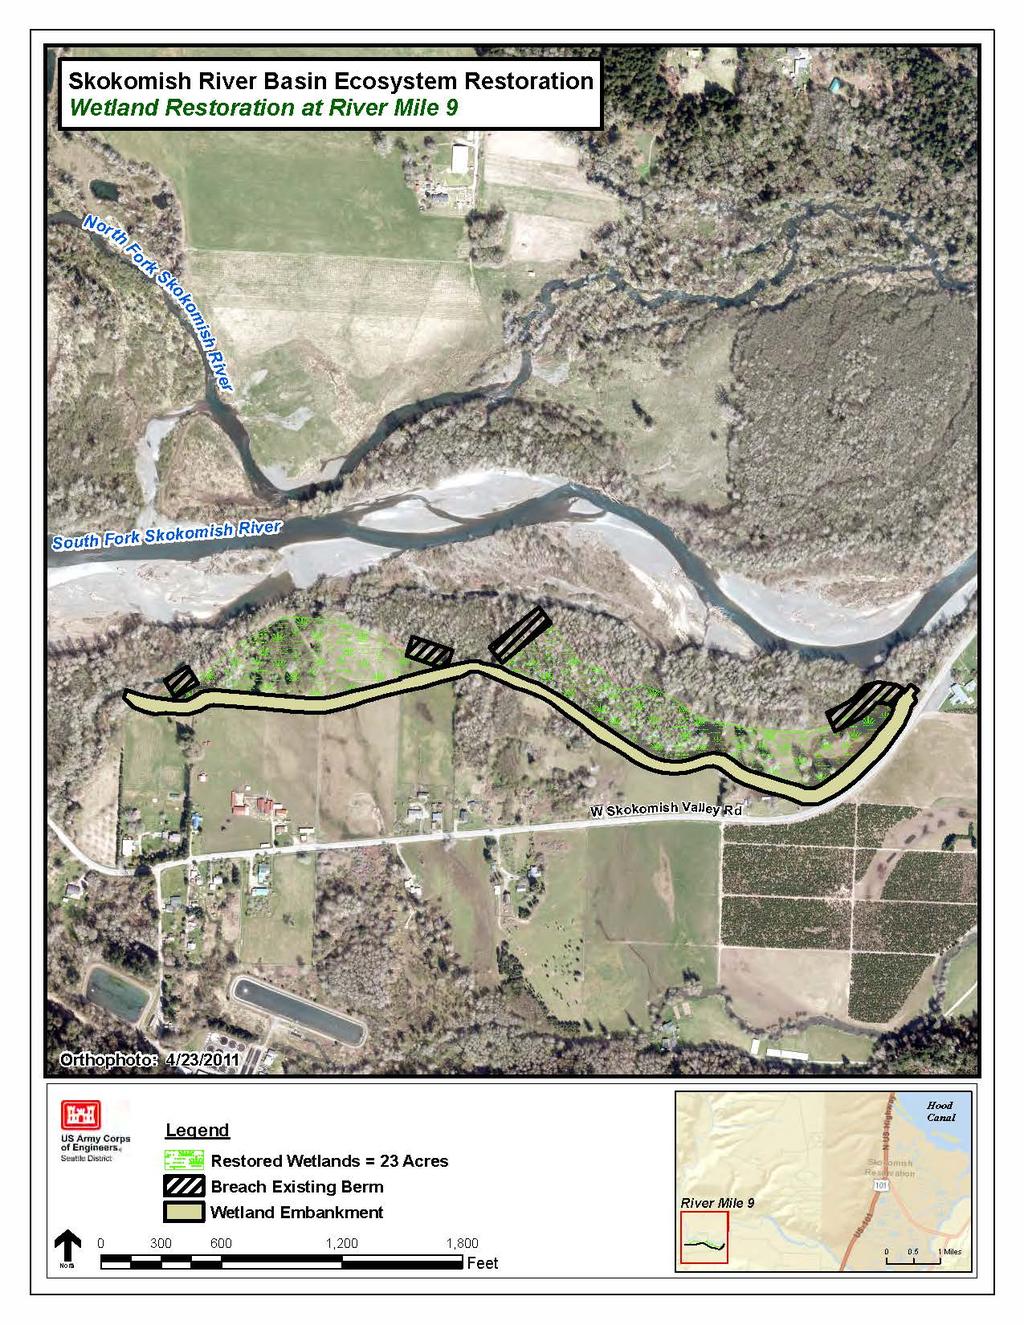 Recommended Plan Features Wetland Restoration at River Mile 9 Benefits Reconnection and restoration